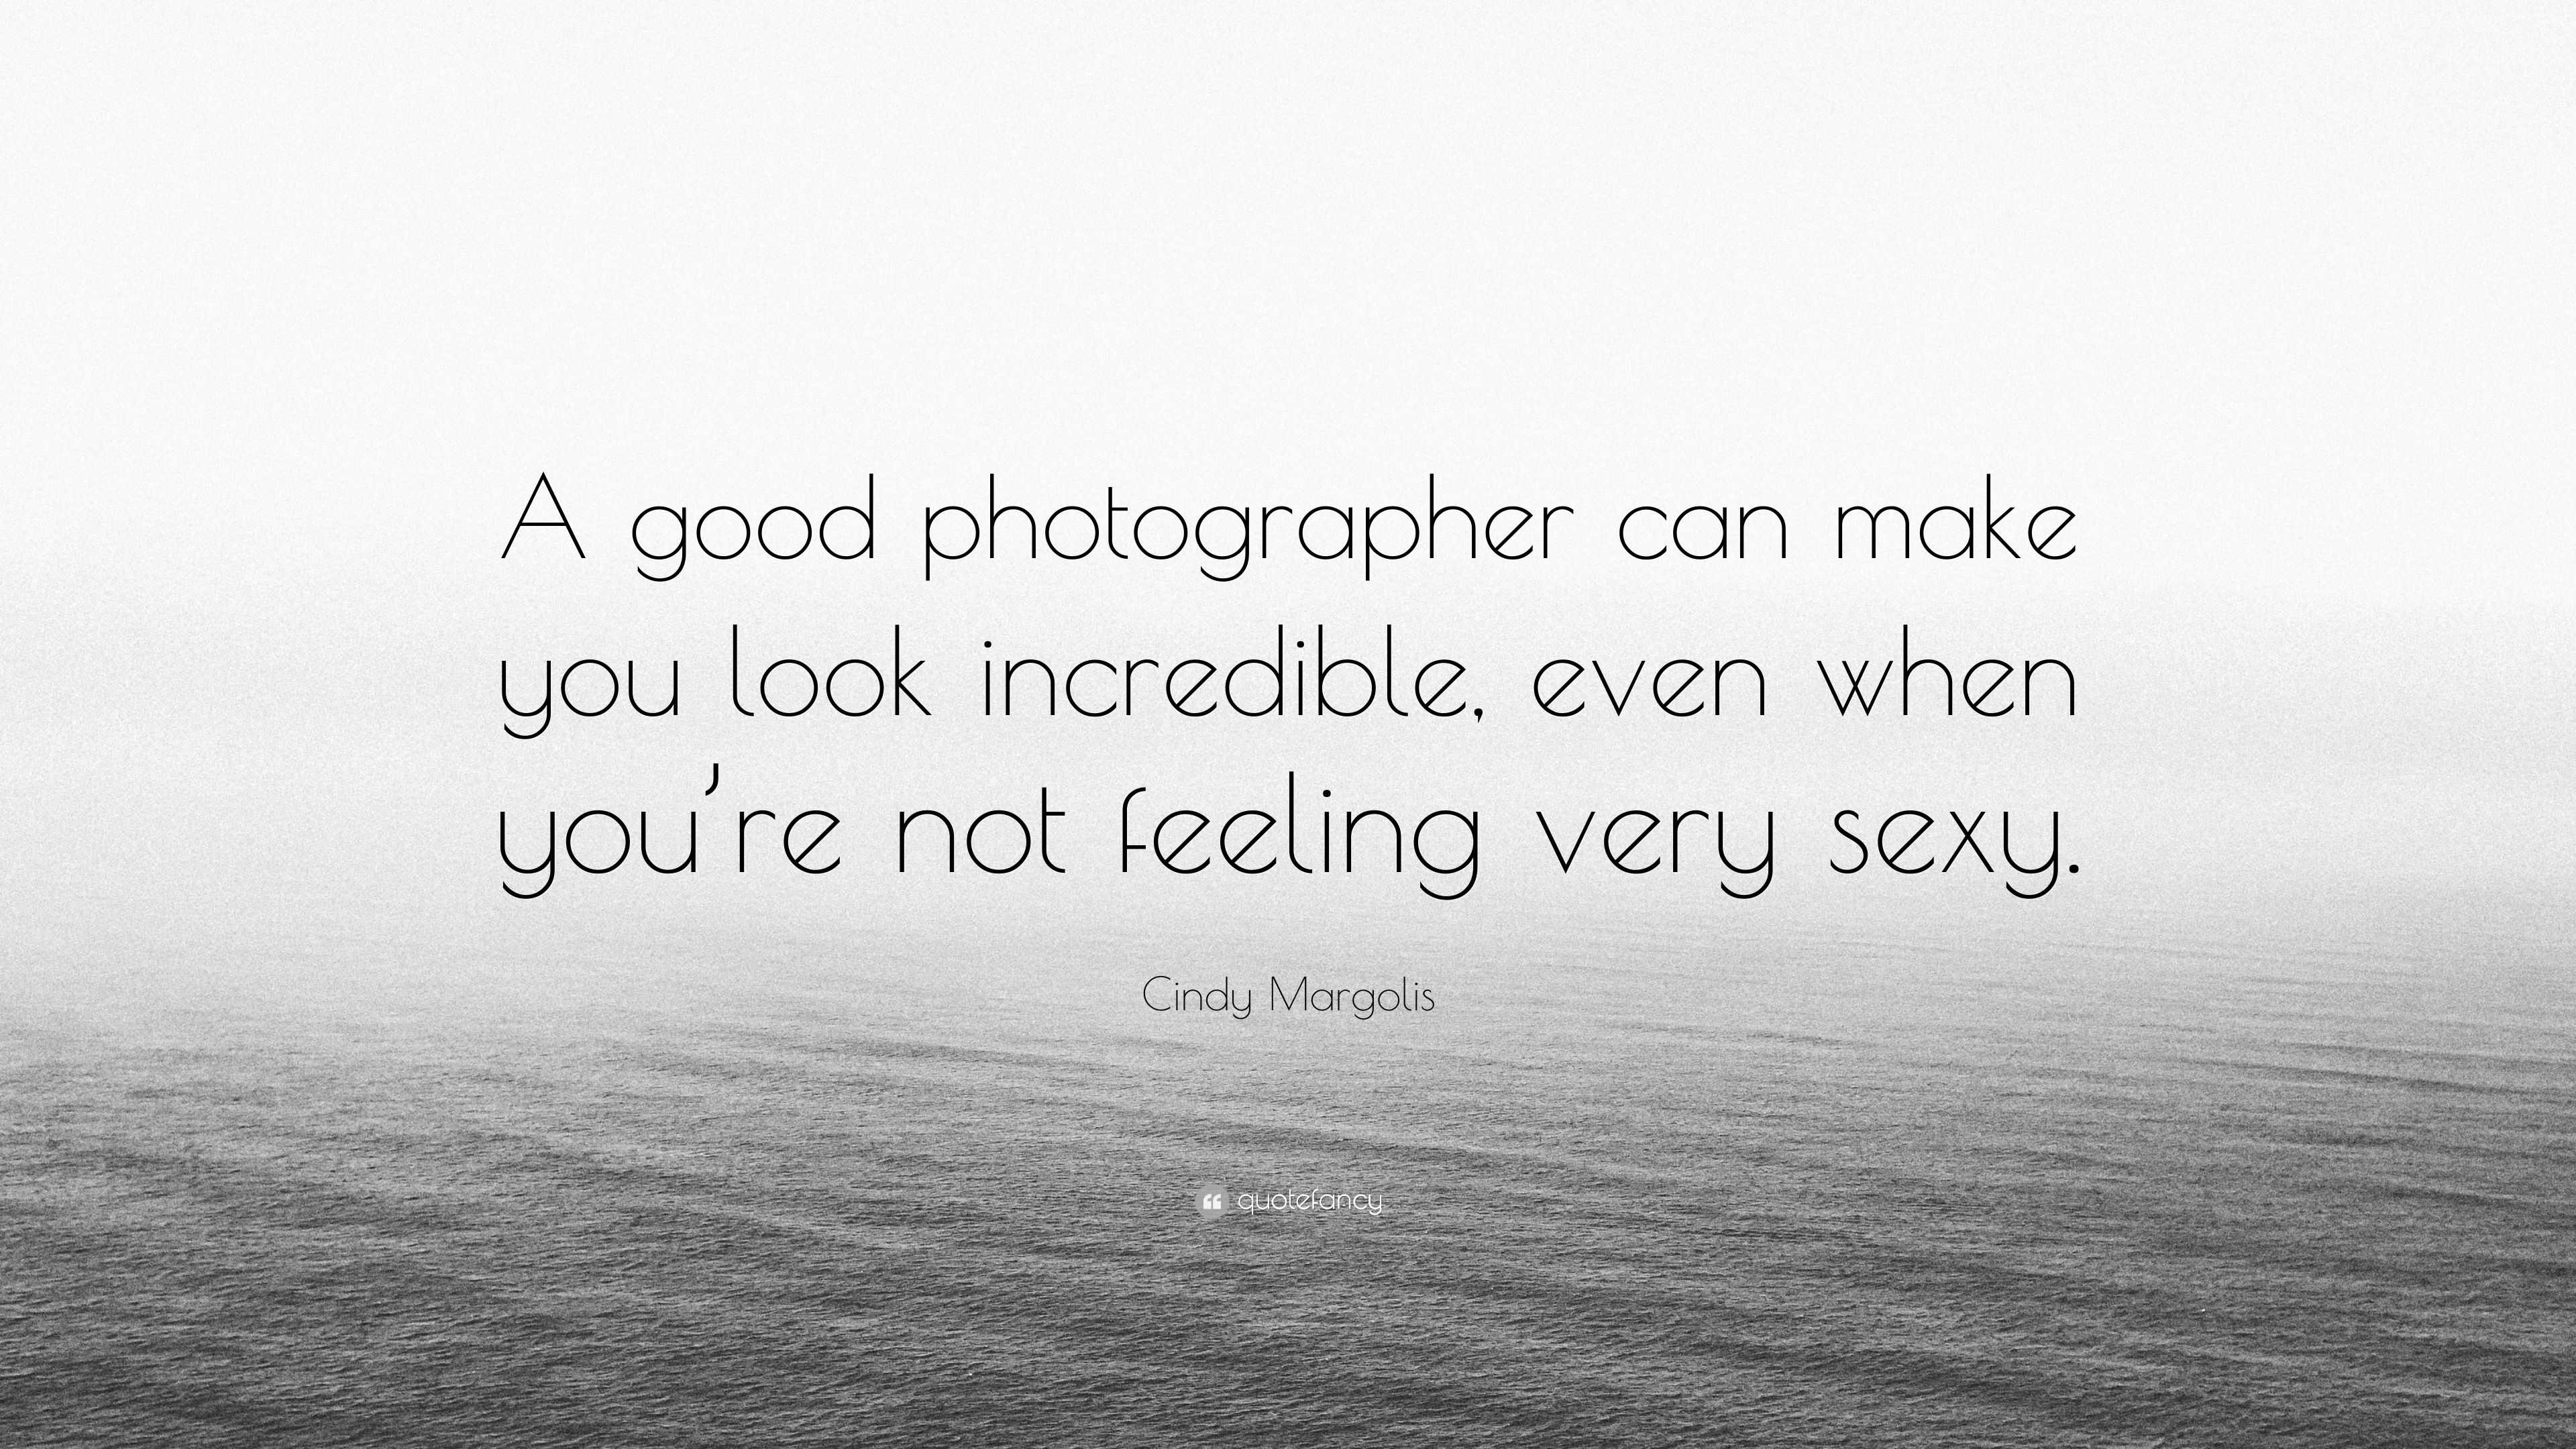 Cindy Margolis Quote “a Good Photographer Can Make You Look Incredible Even When You’re Not